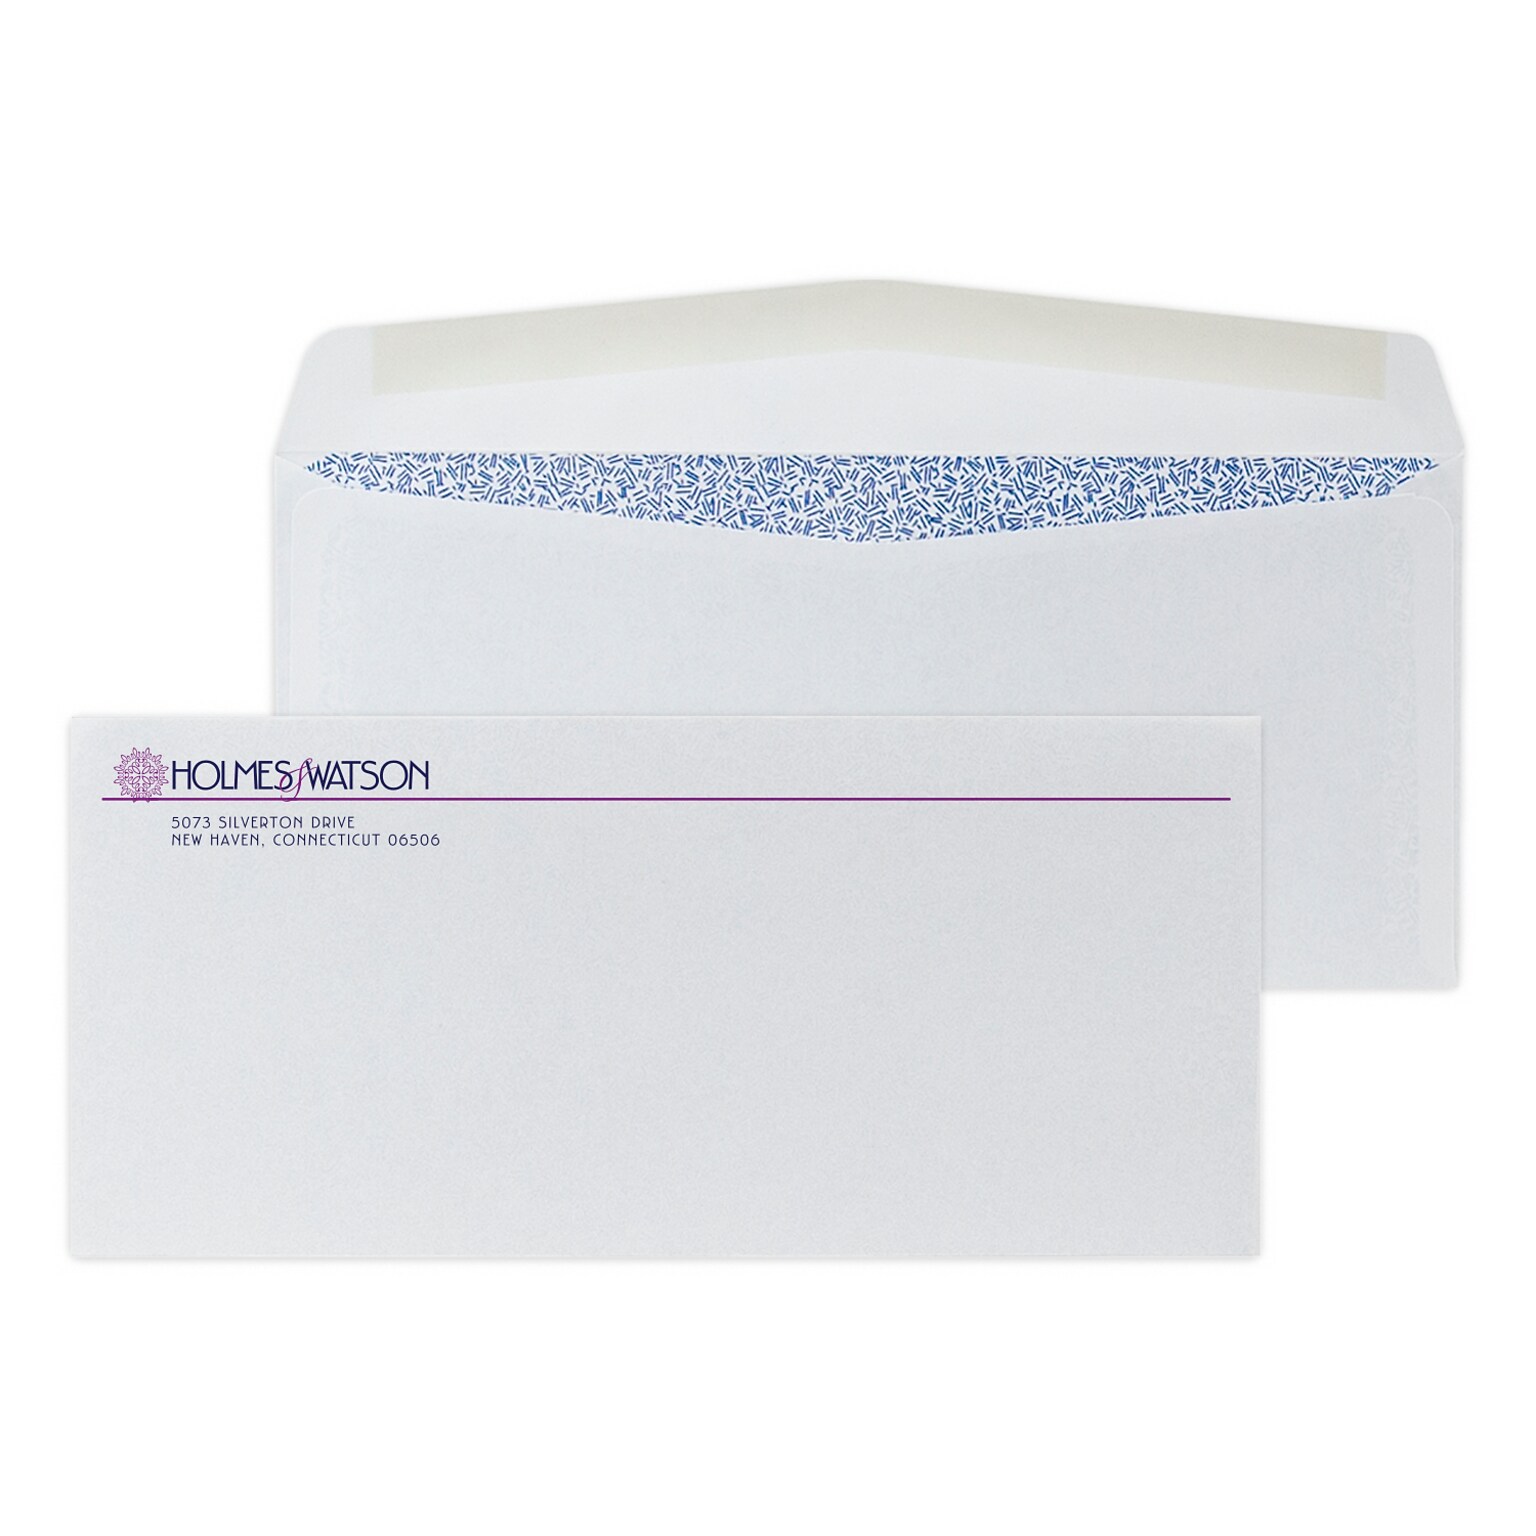 Custom #10 Standard Envelopes with Security Tint, 4 1/4 x 9 1/2, 24# White Wove, 2 Custom Inks, 250 / Pack